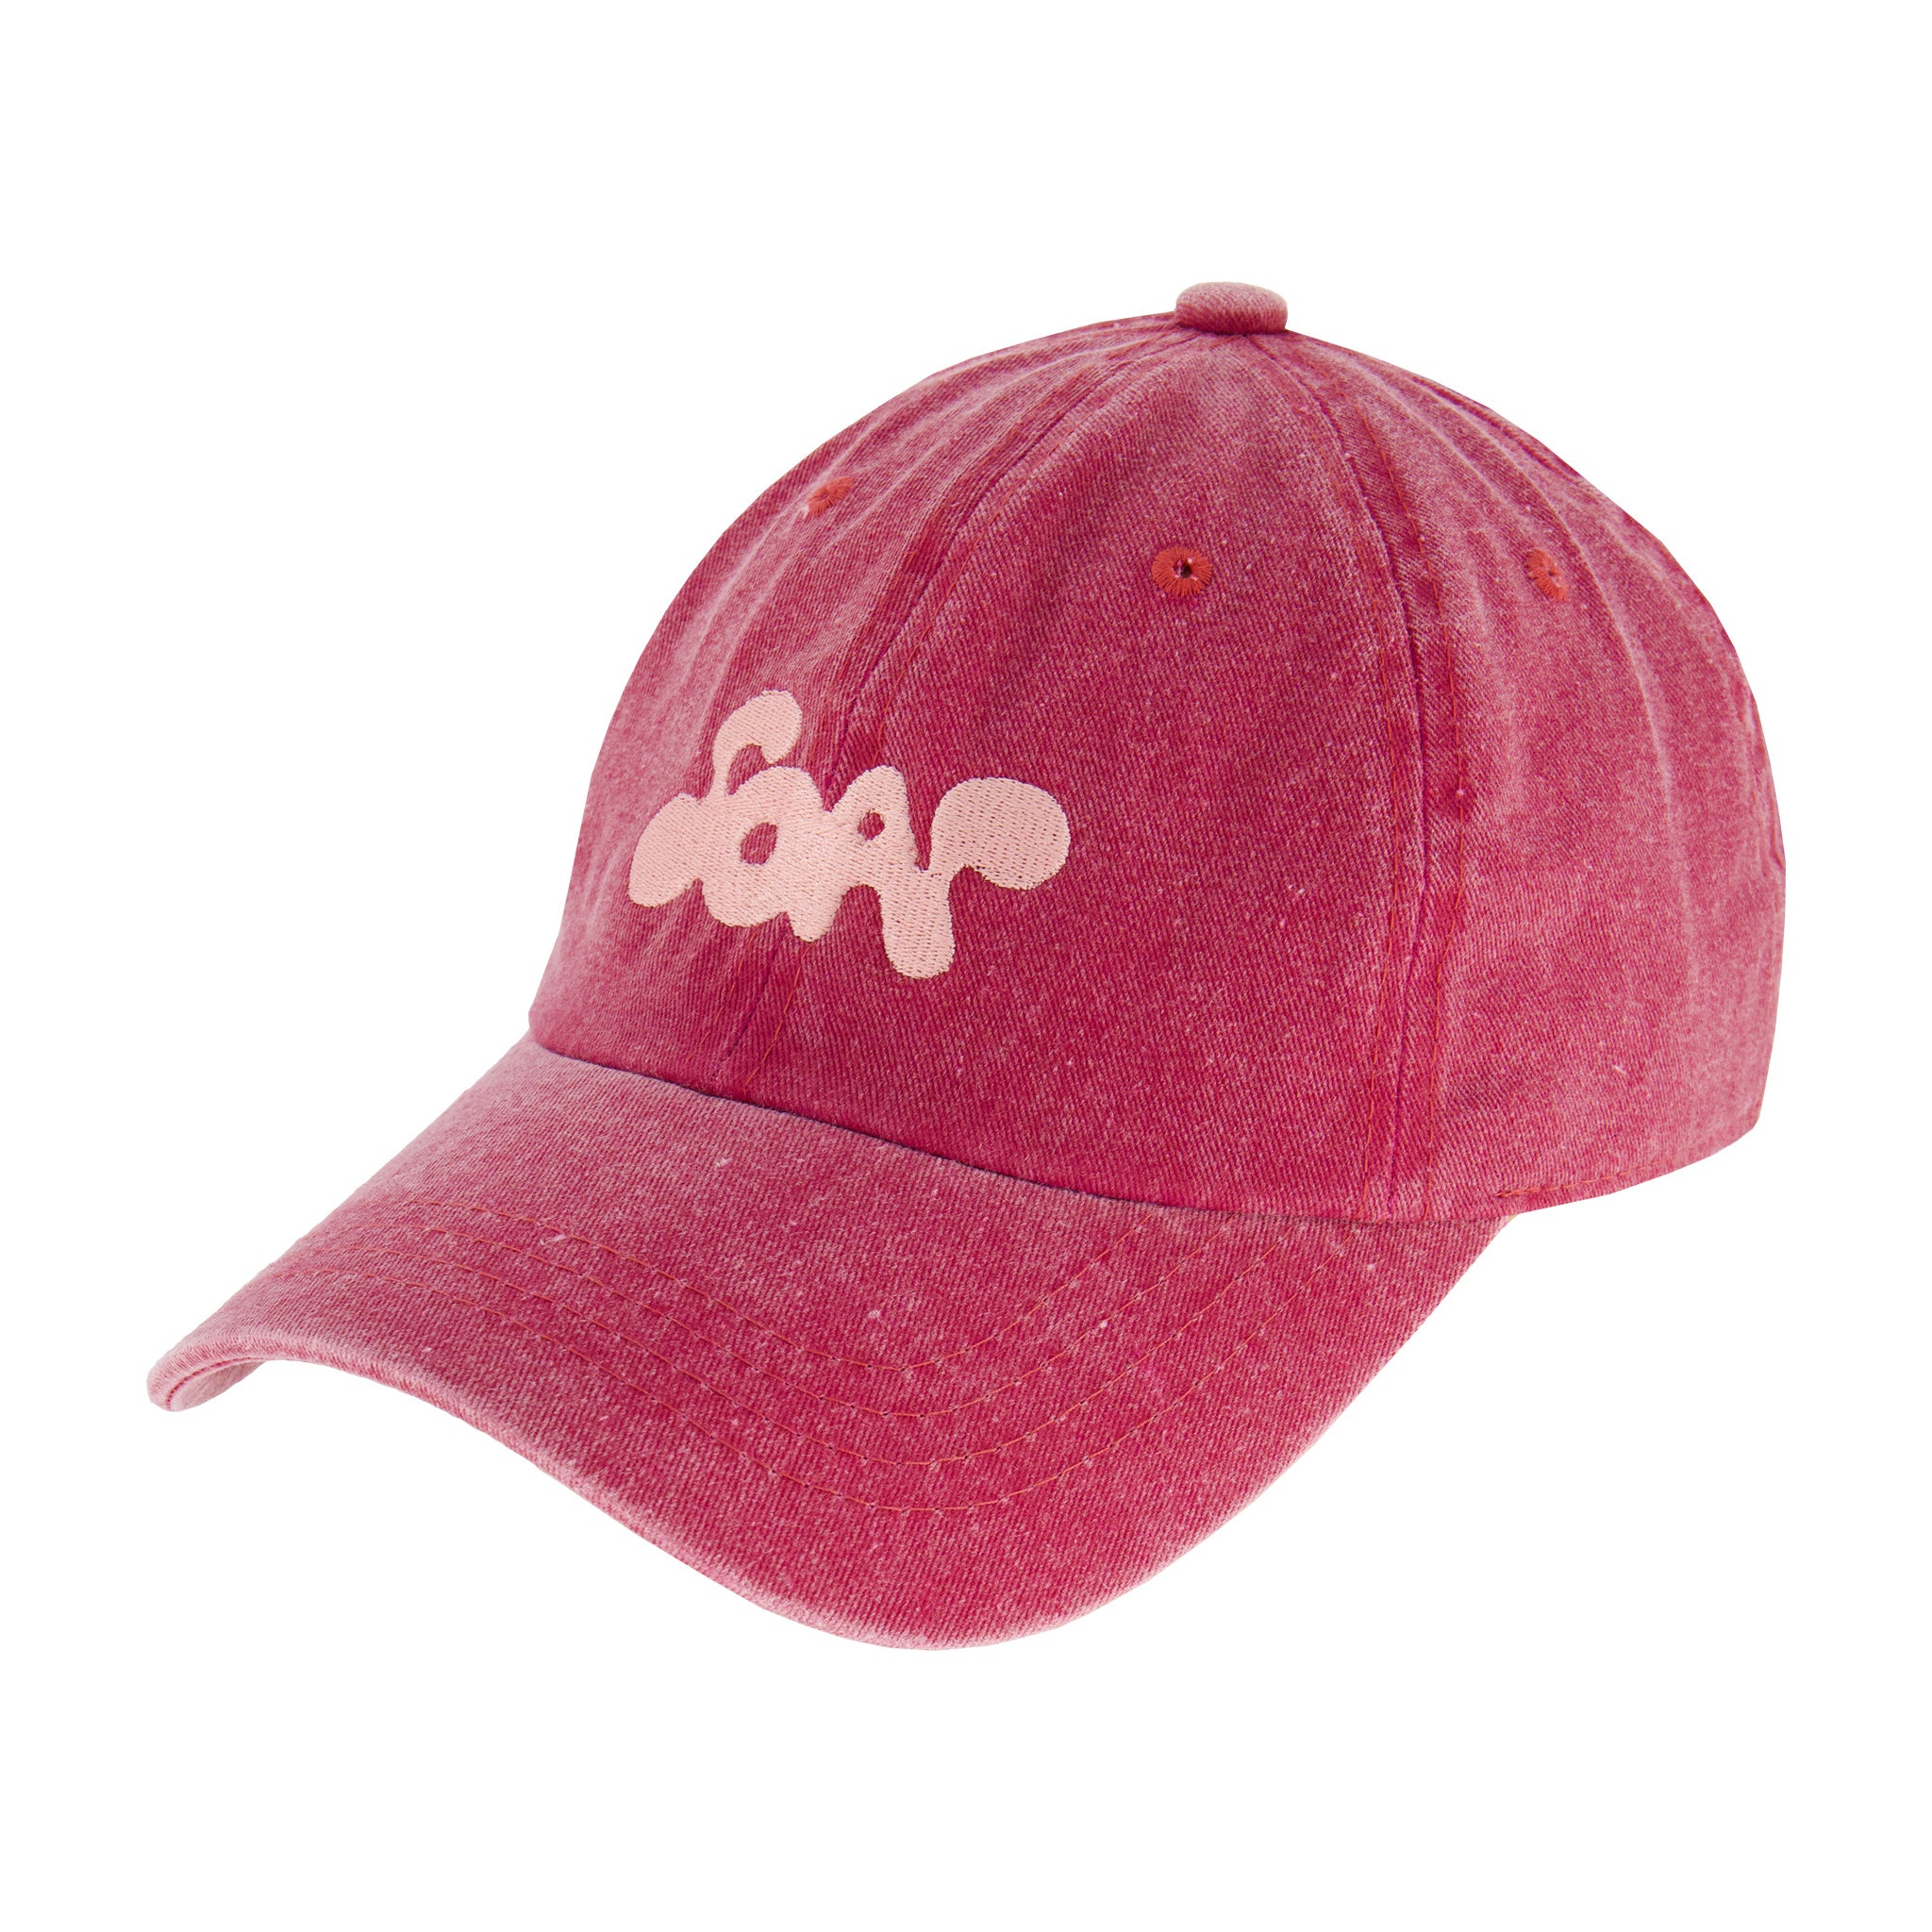 SOAP DADDY CAP (RED)